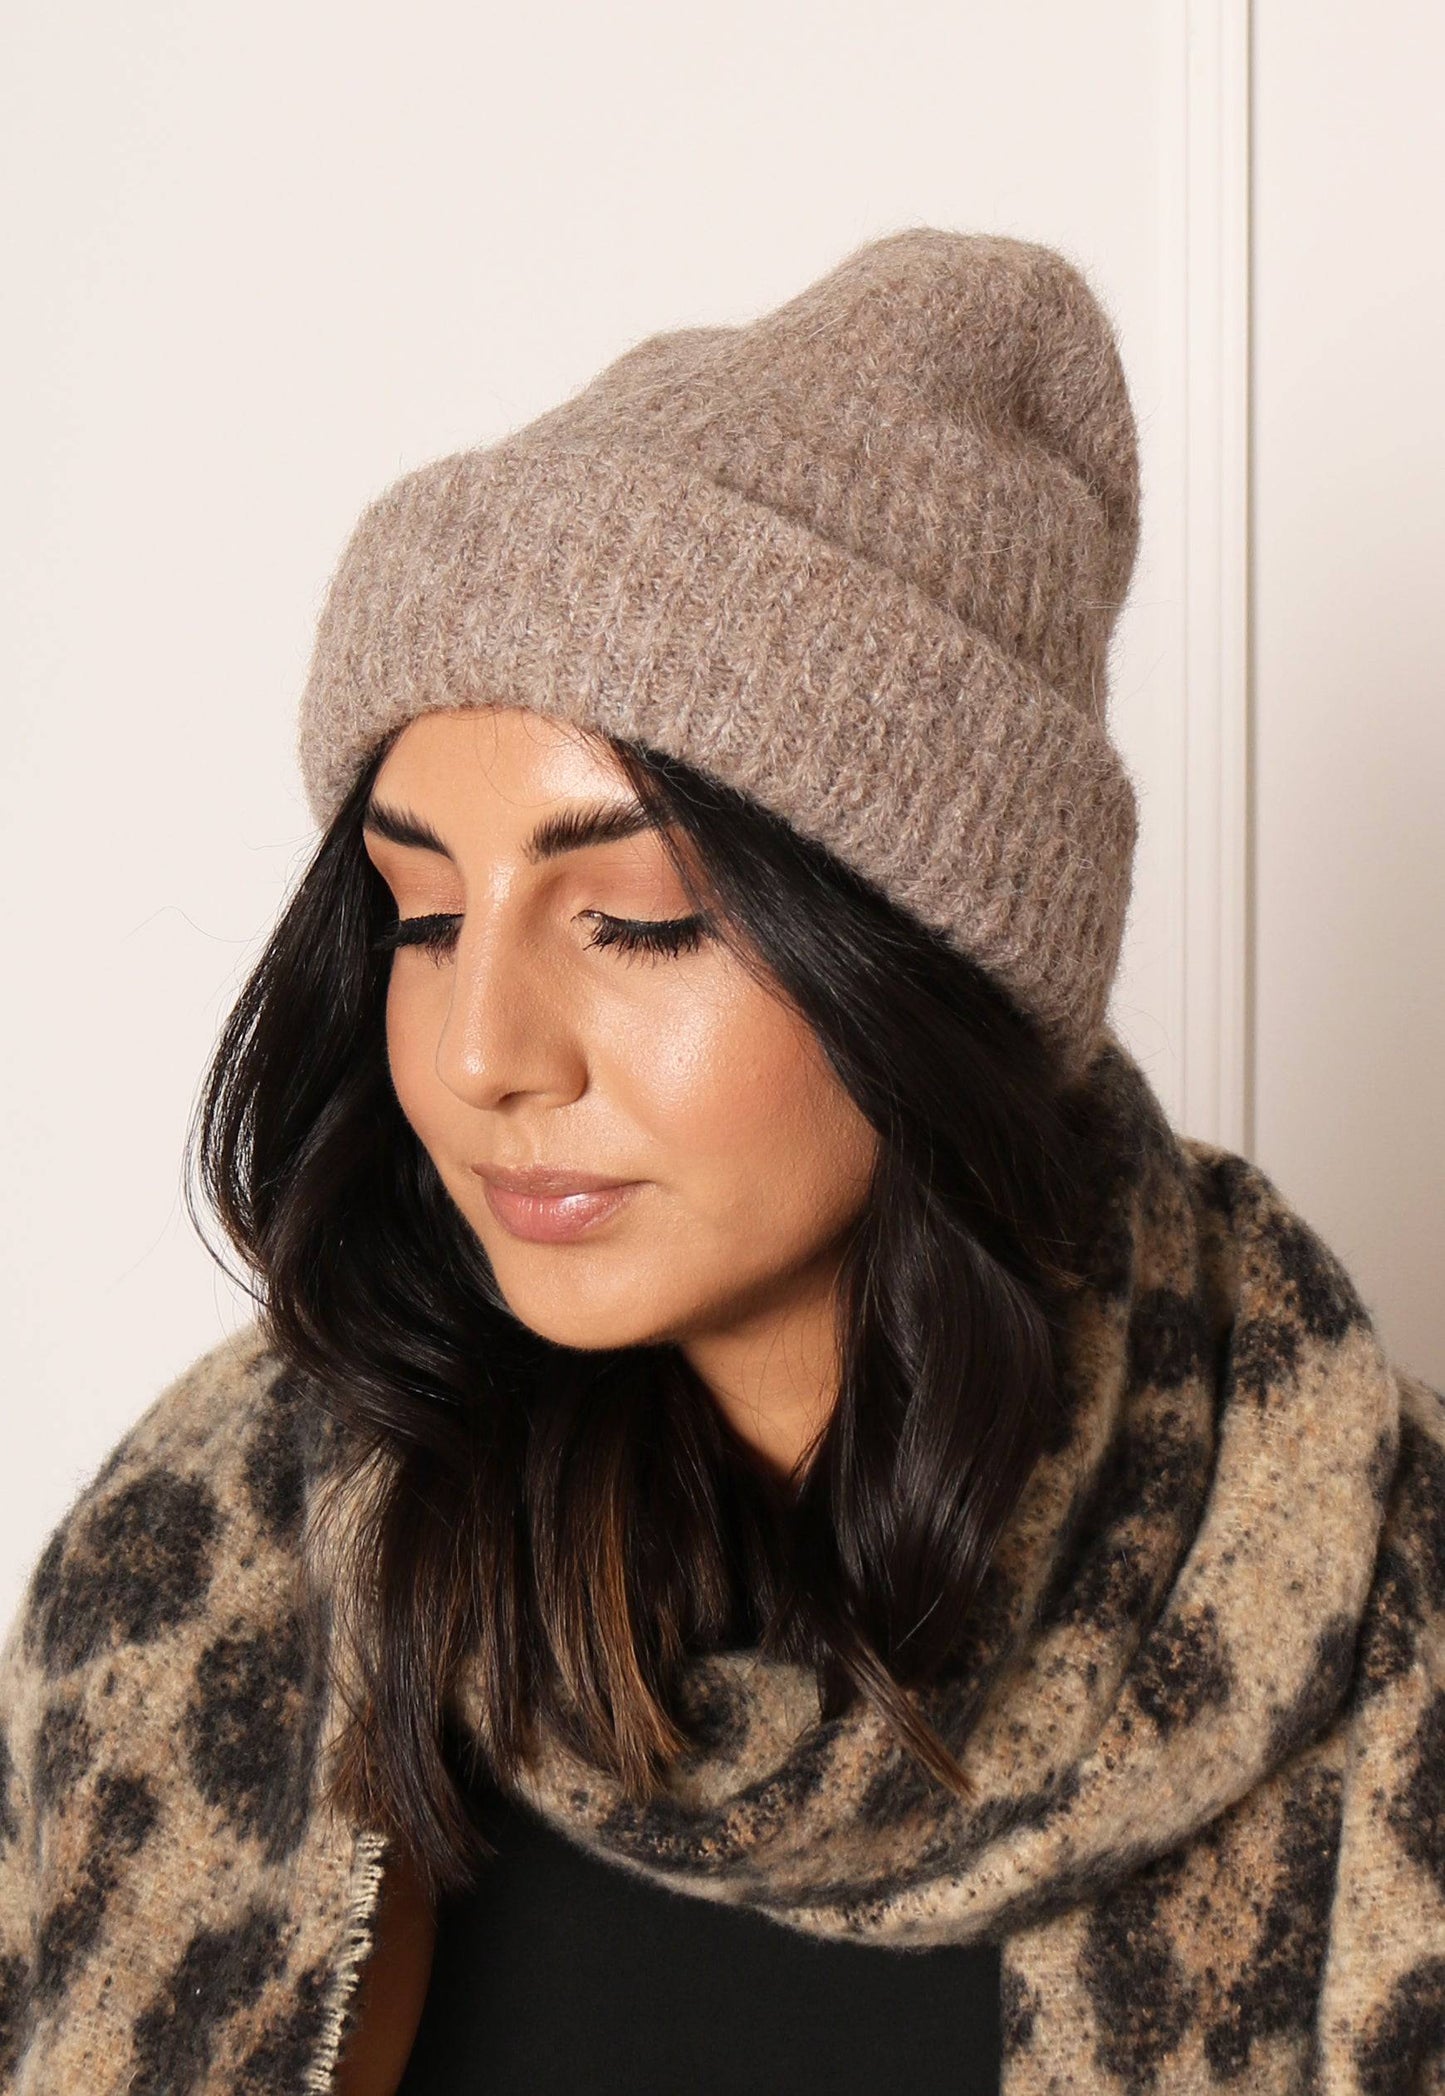 PIECES Fluffy Knit Ribbed Turn Up Beanie Hat in Beige - One Nation Clothing